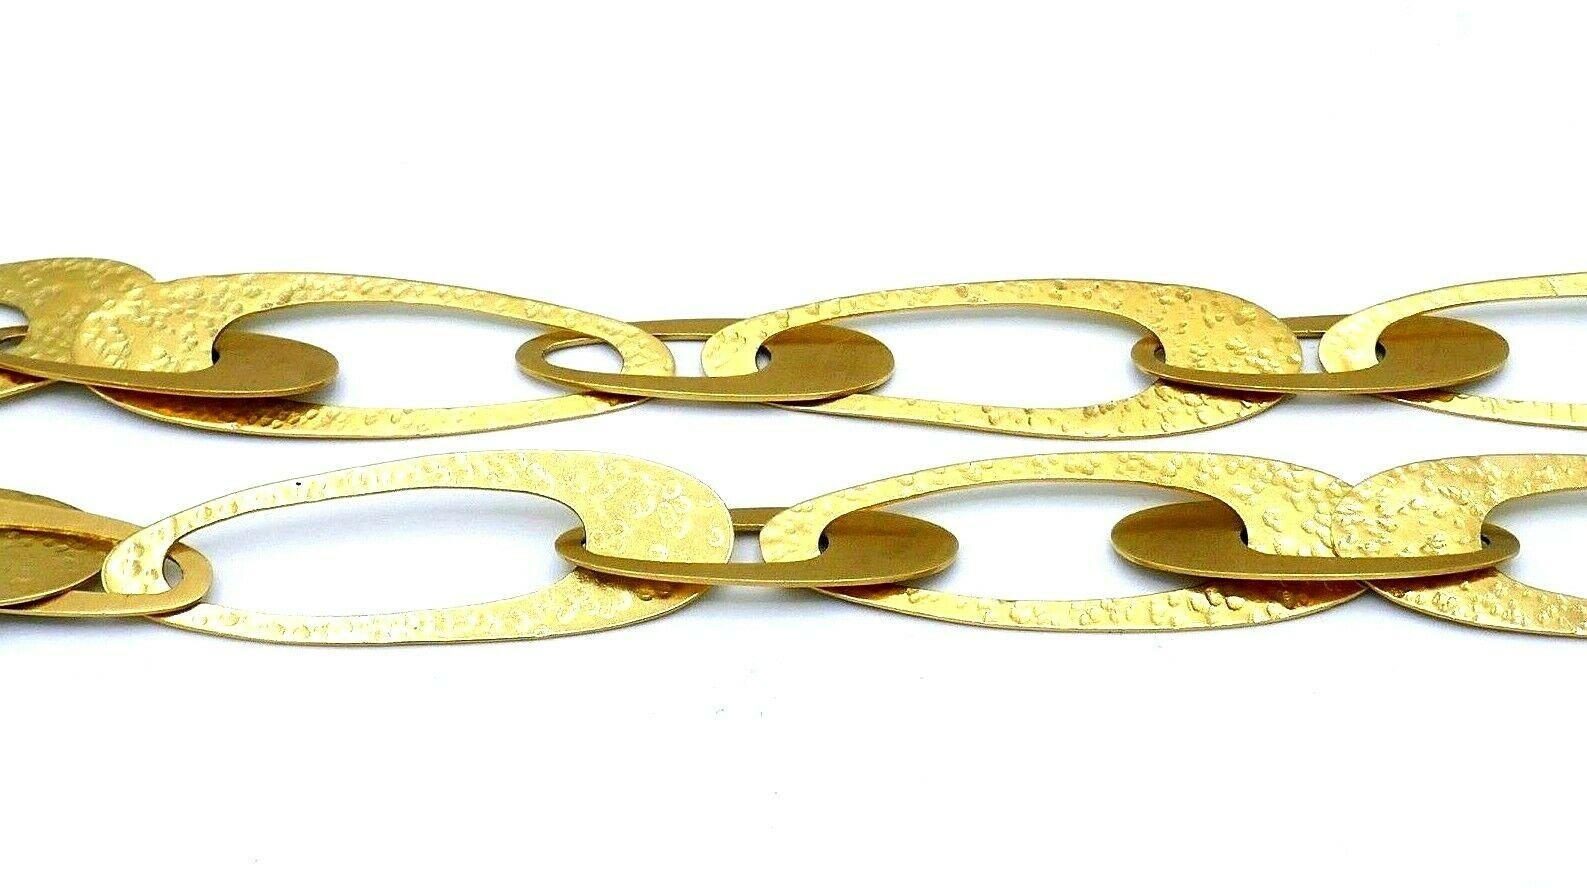 Gorgeous vintage (c. 1970s) flat link necklace made of 14k hammered and polished gold. 
Measurements: 22.5